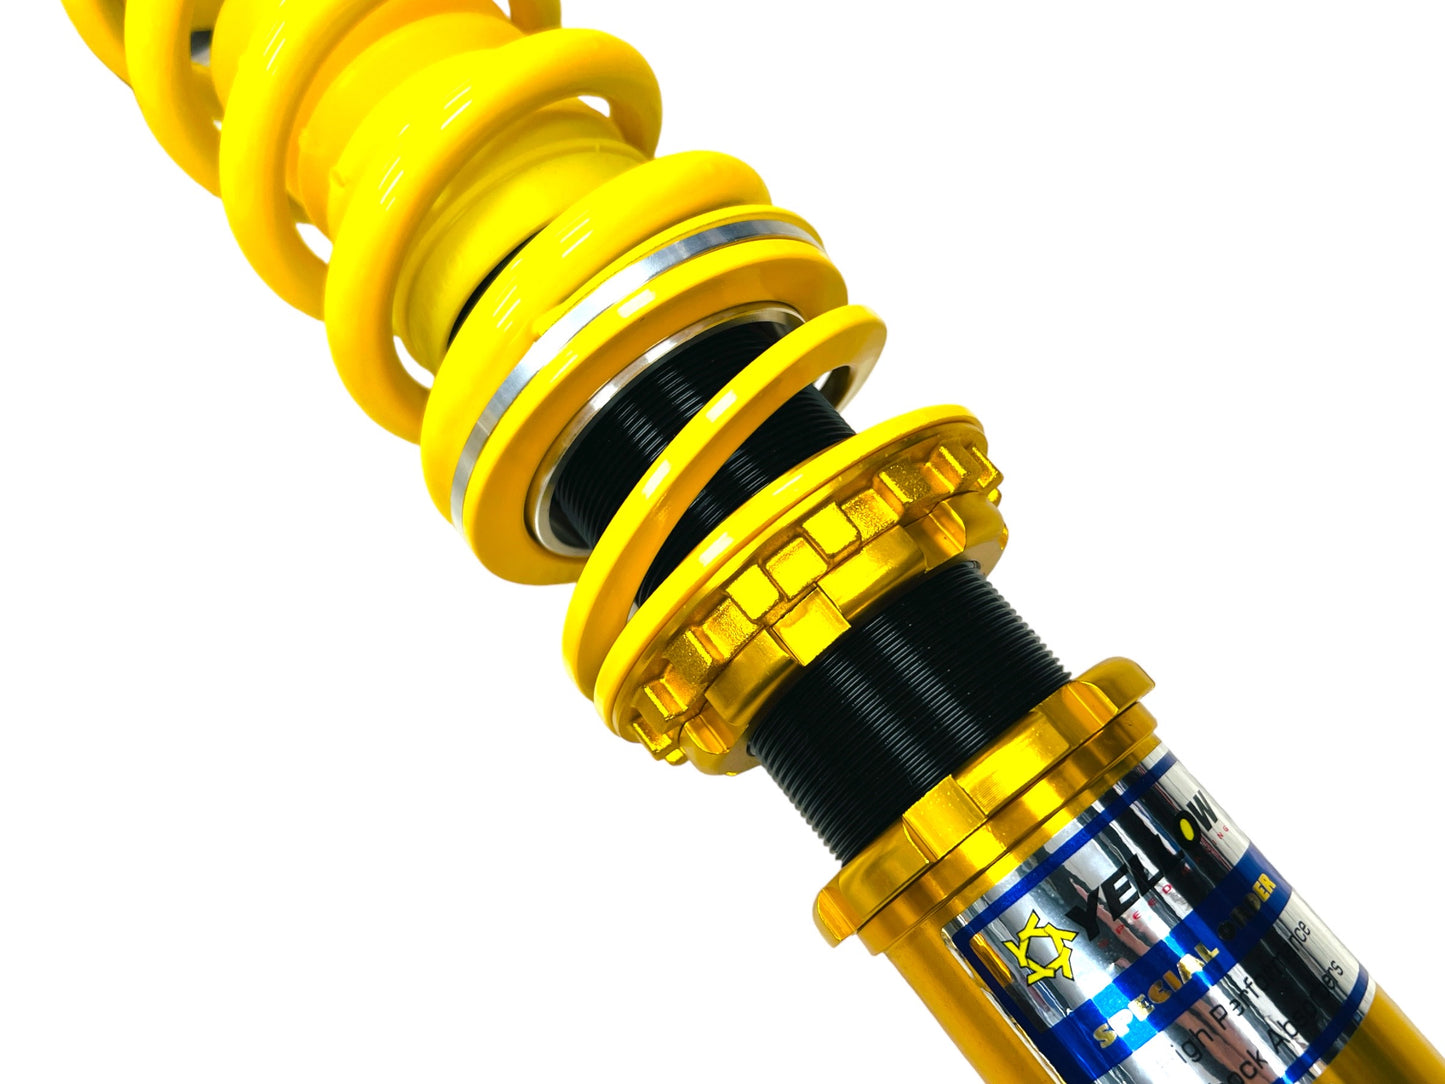 Dynamic Pro Gravel Rally Coilovers - Toyota MR2 1990-1999 (W20/SW20)